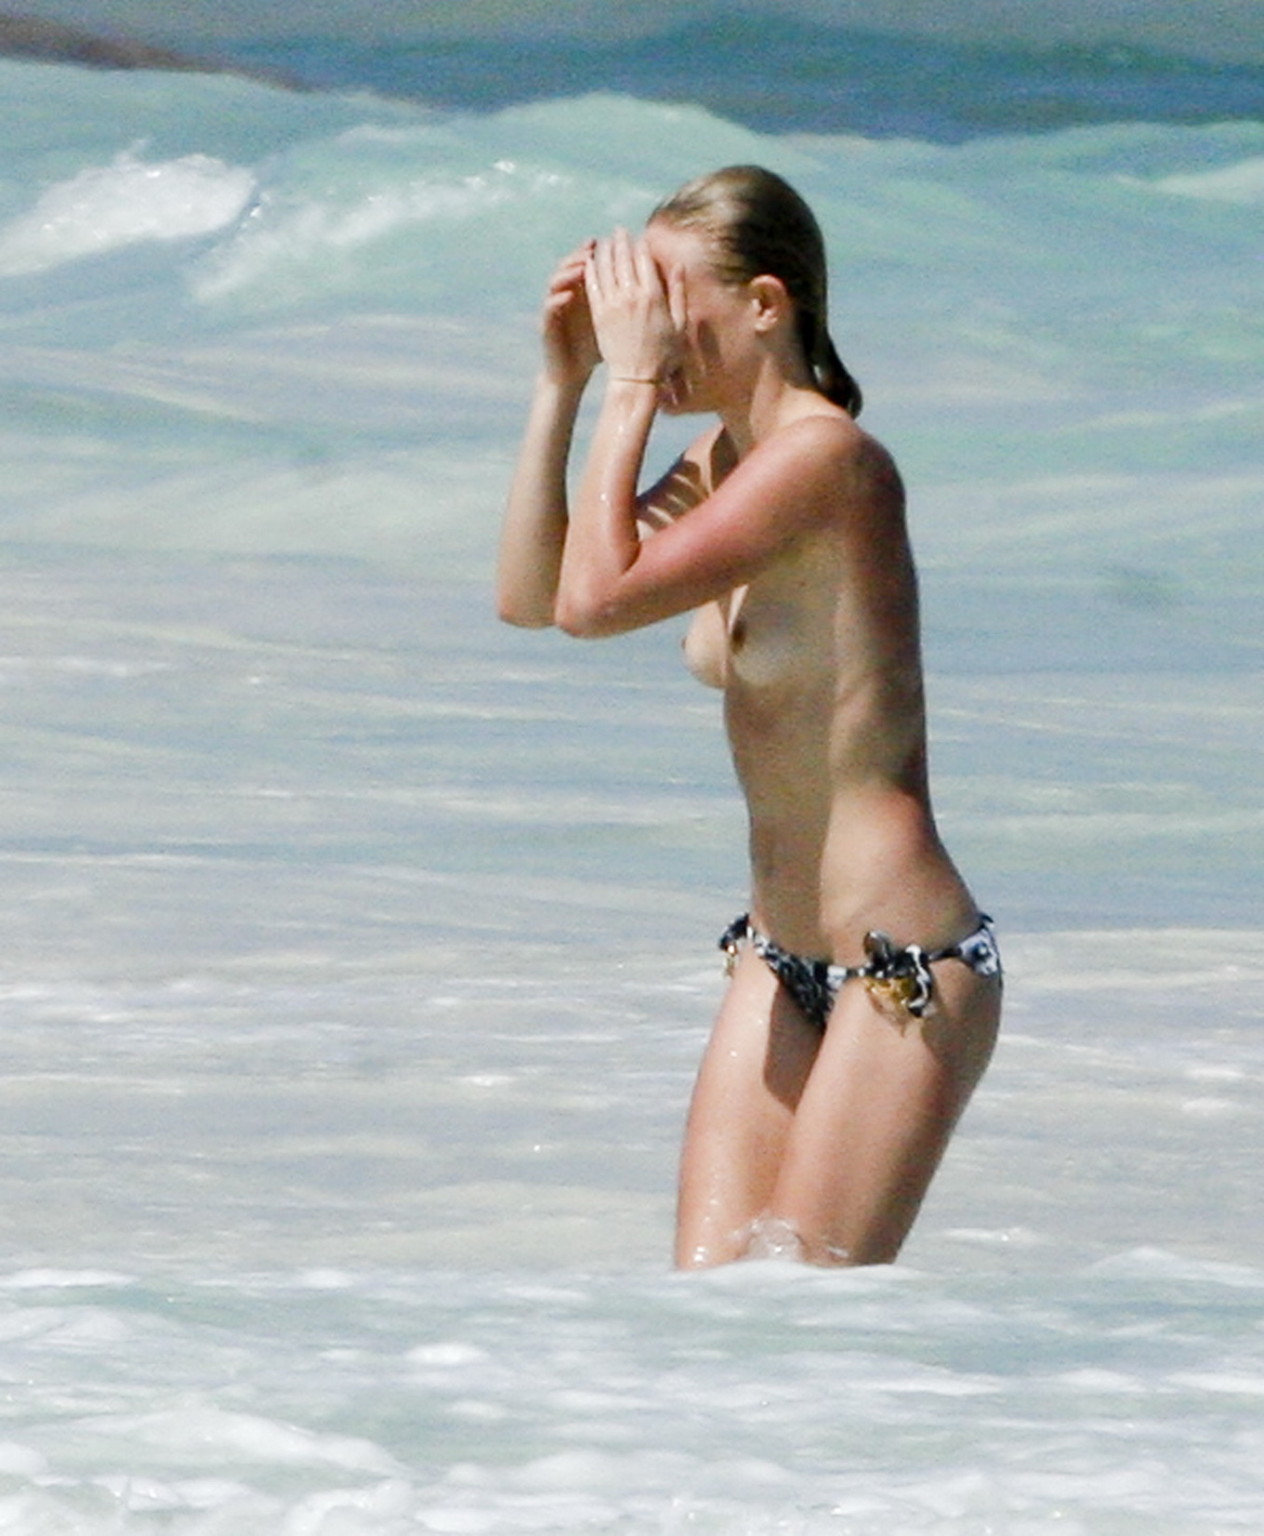 Kate Bosworth topless on the beach in Cancun Mexico #75308613